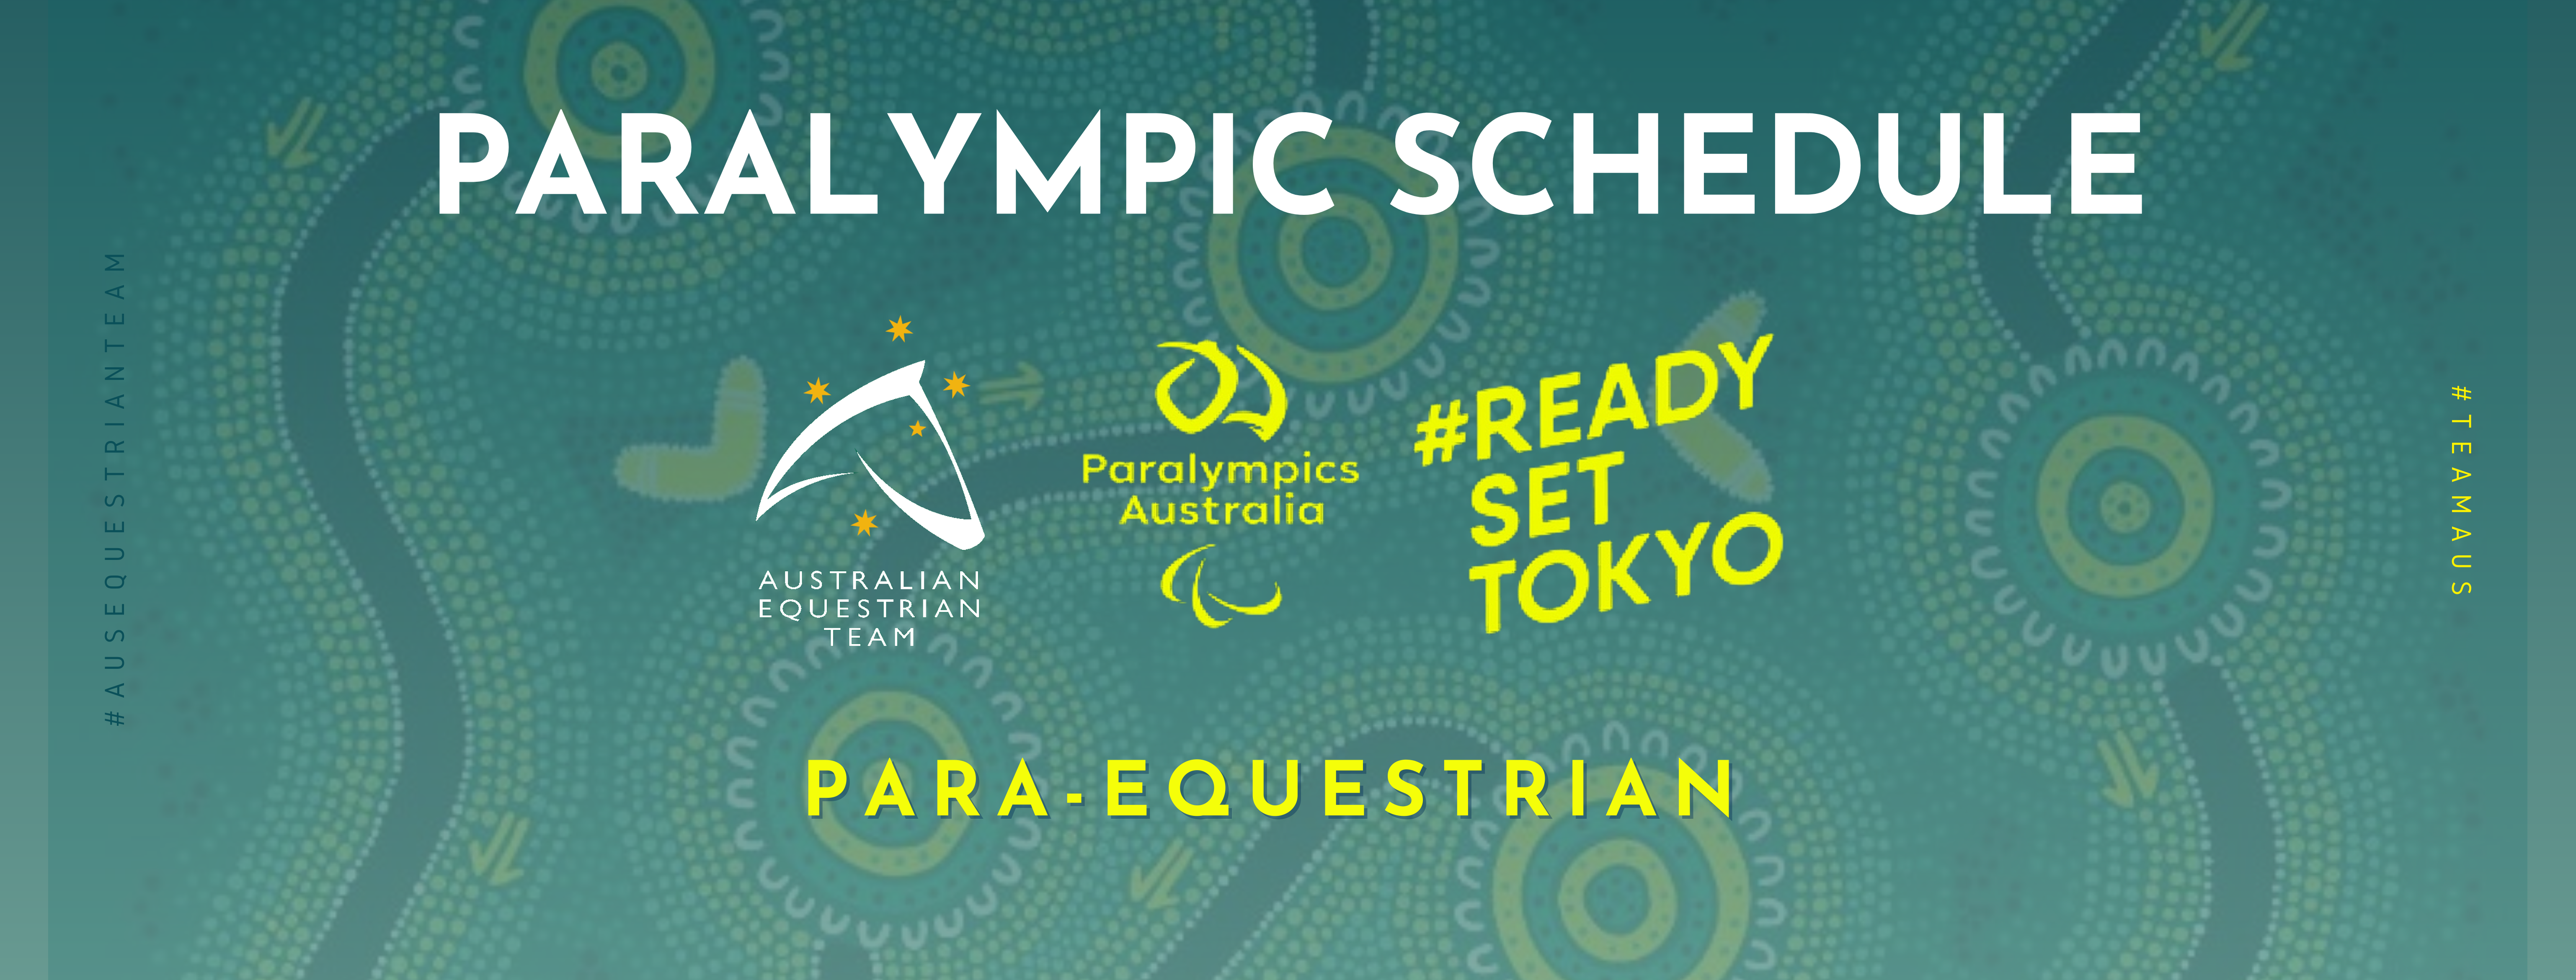 Paralympic schedule 2021